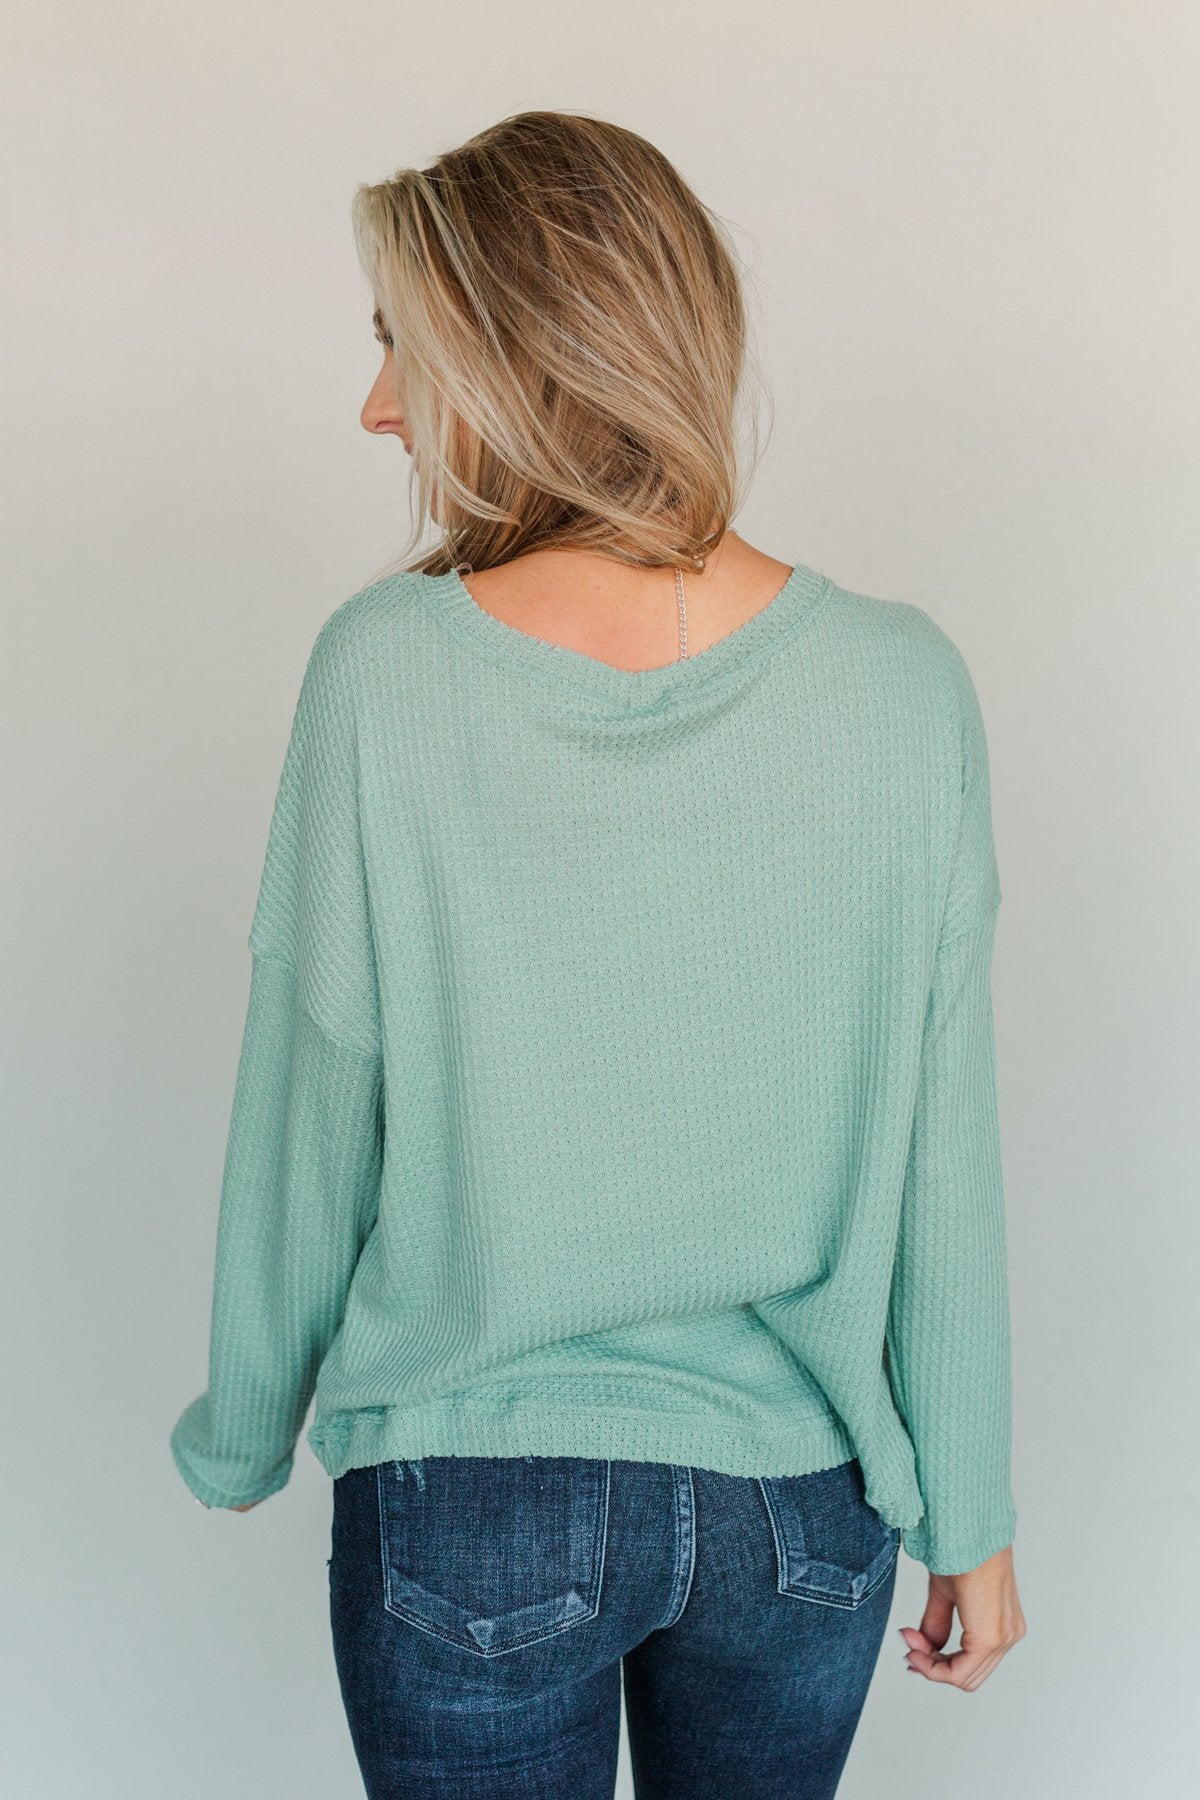 Hope Filled Days Waffle Knit Top- Mint